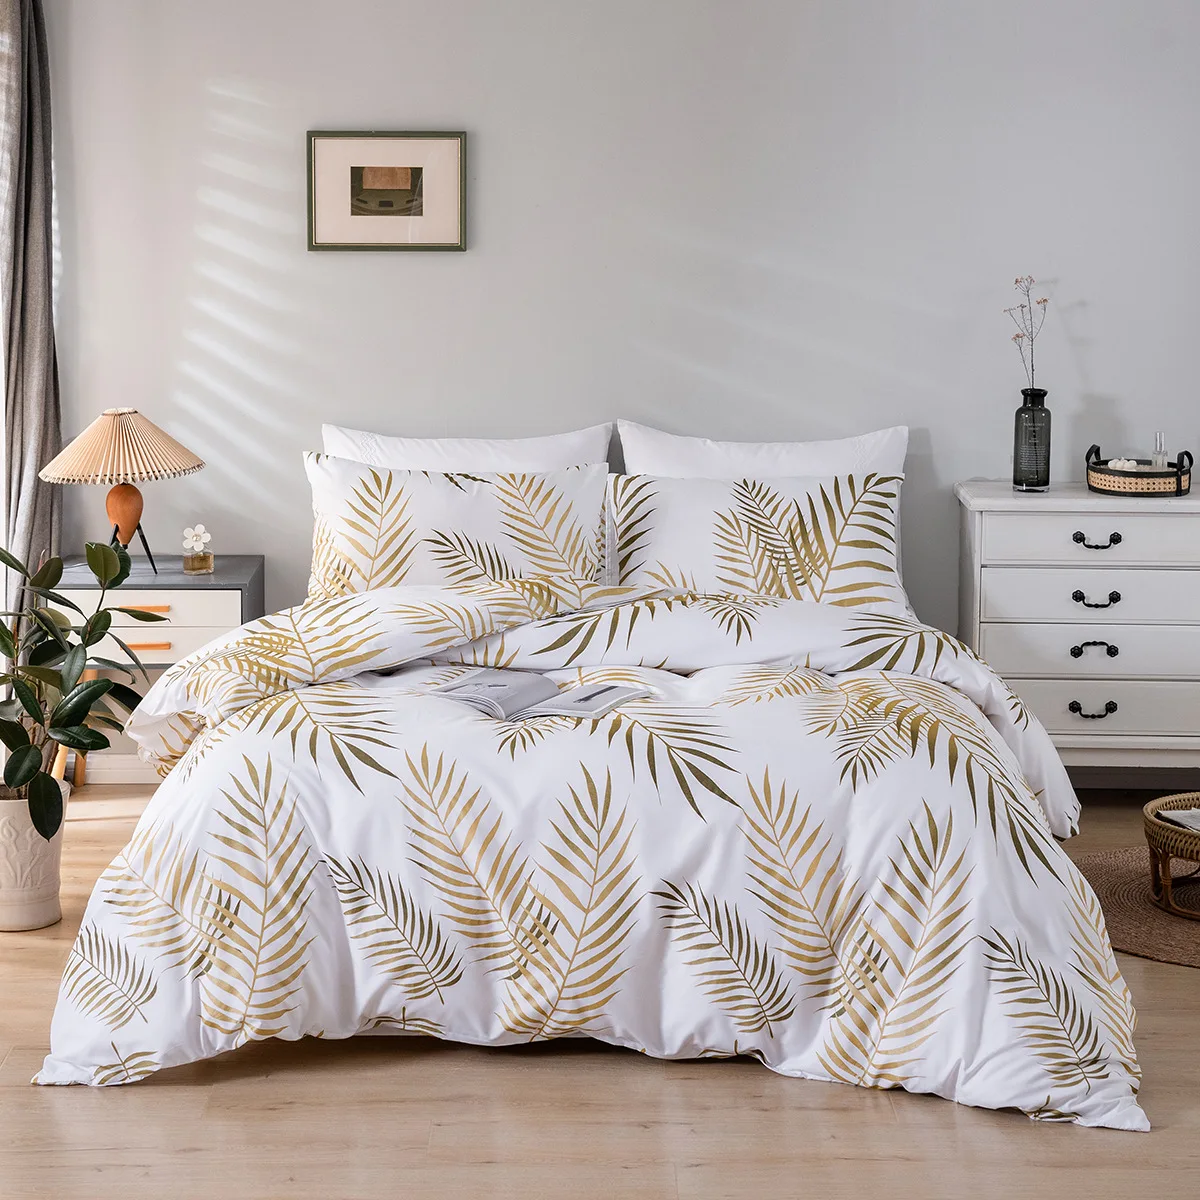 

Home textiles Printing Quilt Bed Cover Queen King Size Soft Skin Friendly Duvet Cover Set 3PC with Pillowcase US/UK/AR Size